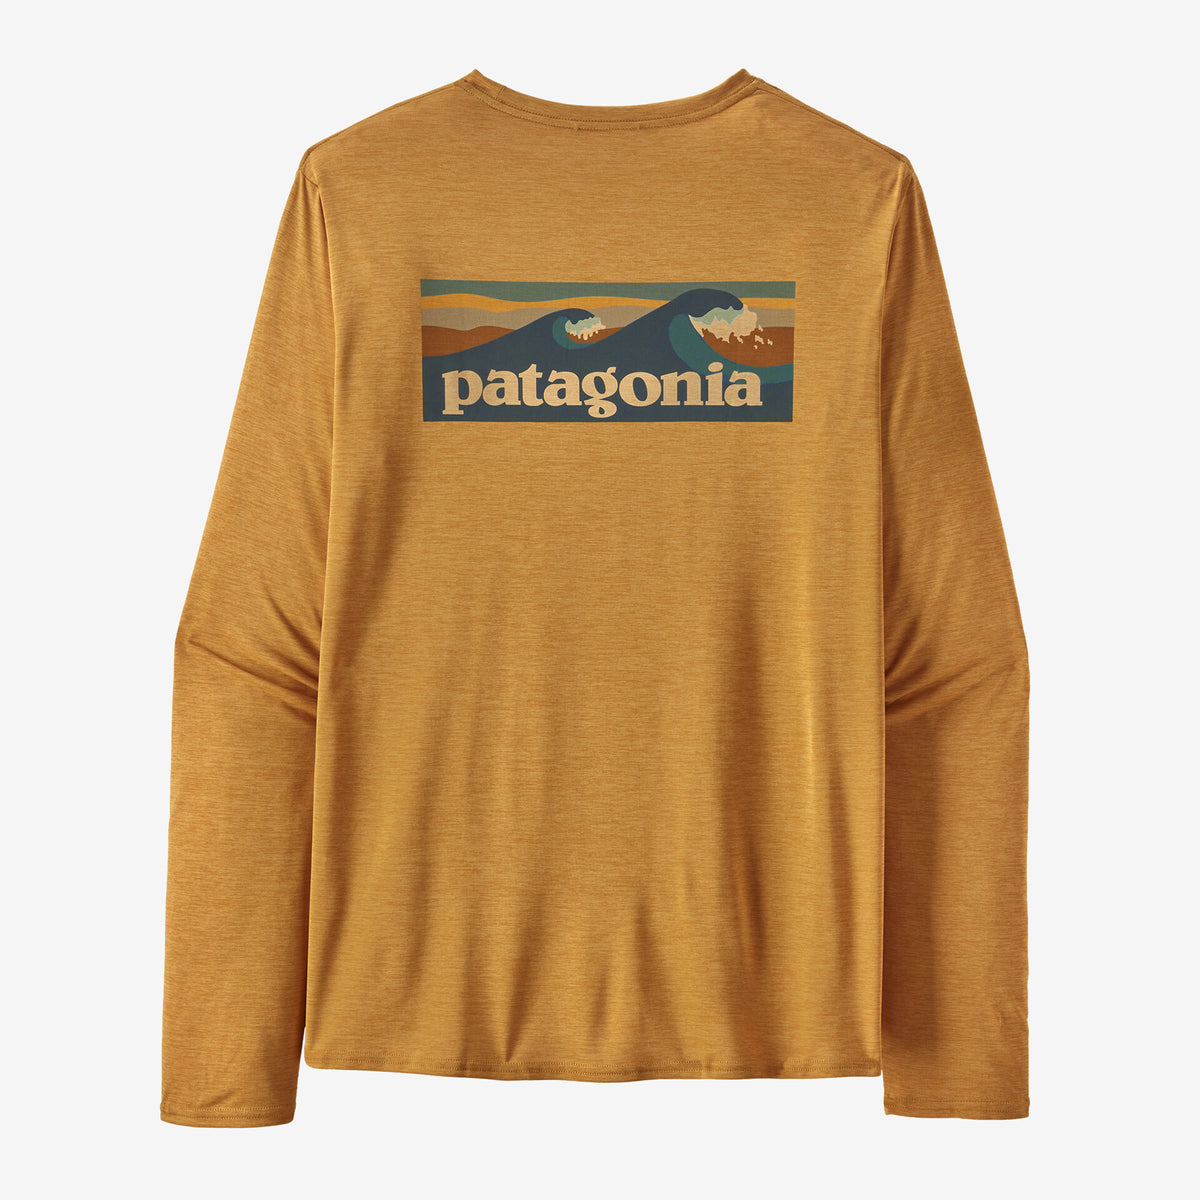 Everyone loves a dea! So make sure to Shop for Patagonia M's L/S Cap Cool  Daily Graphic Shirt Waters - Pufferfish Gold X-Dye Patagonia at our  Clearance prices